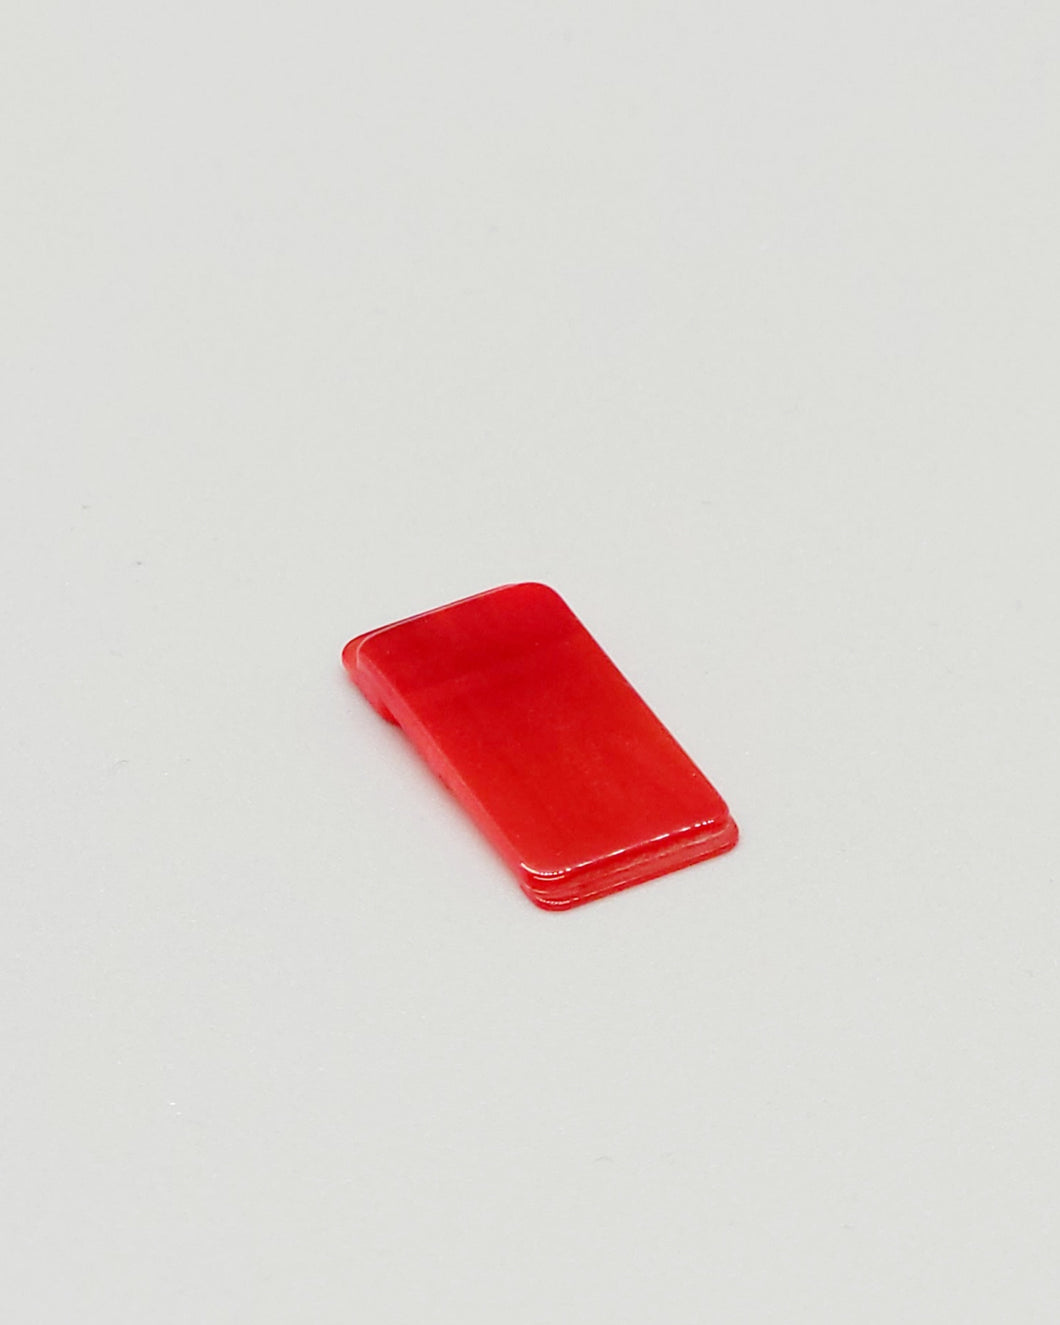 ASTRO Acrylic Fire Button - Rage Red